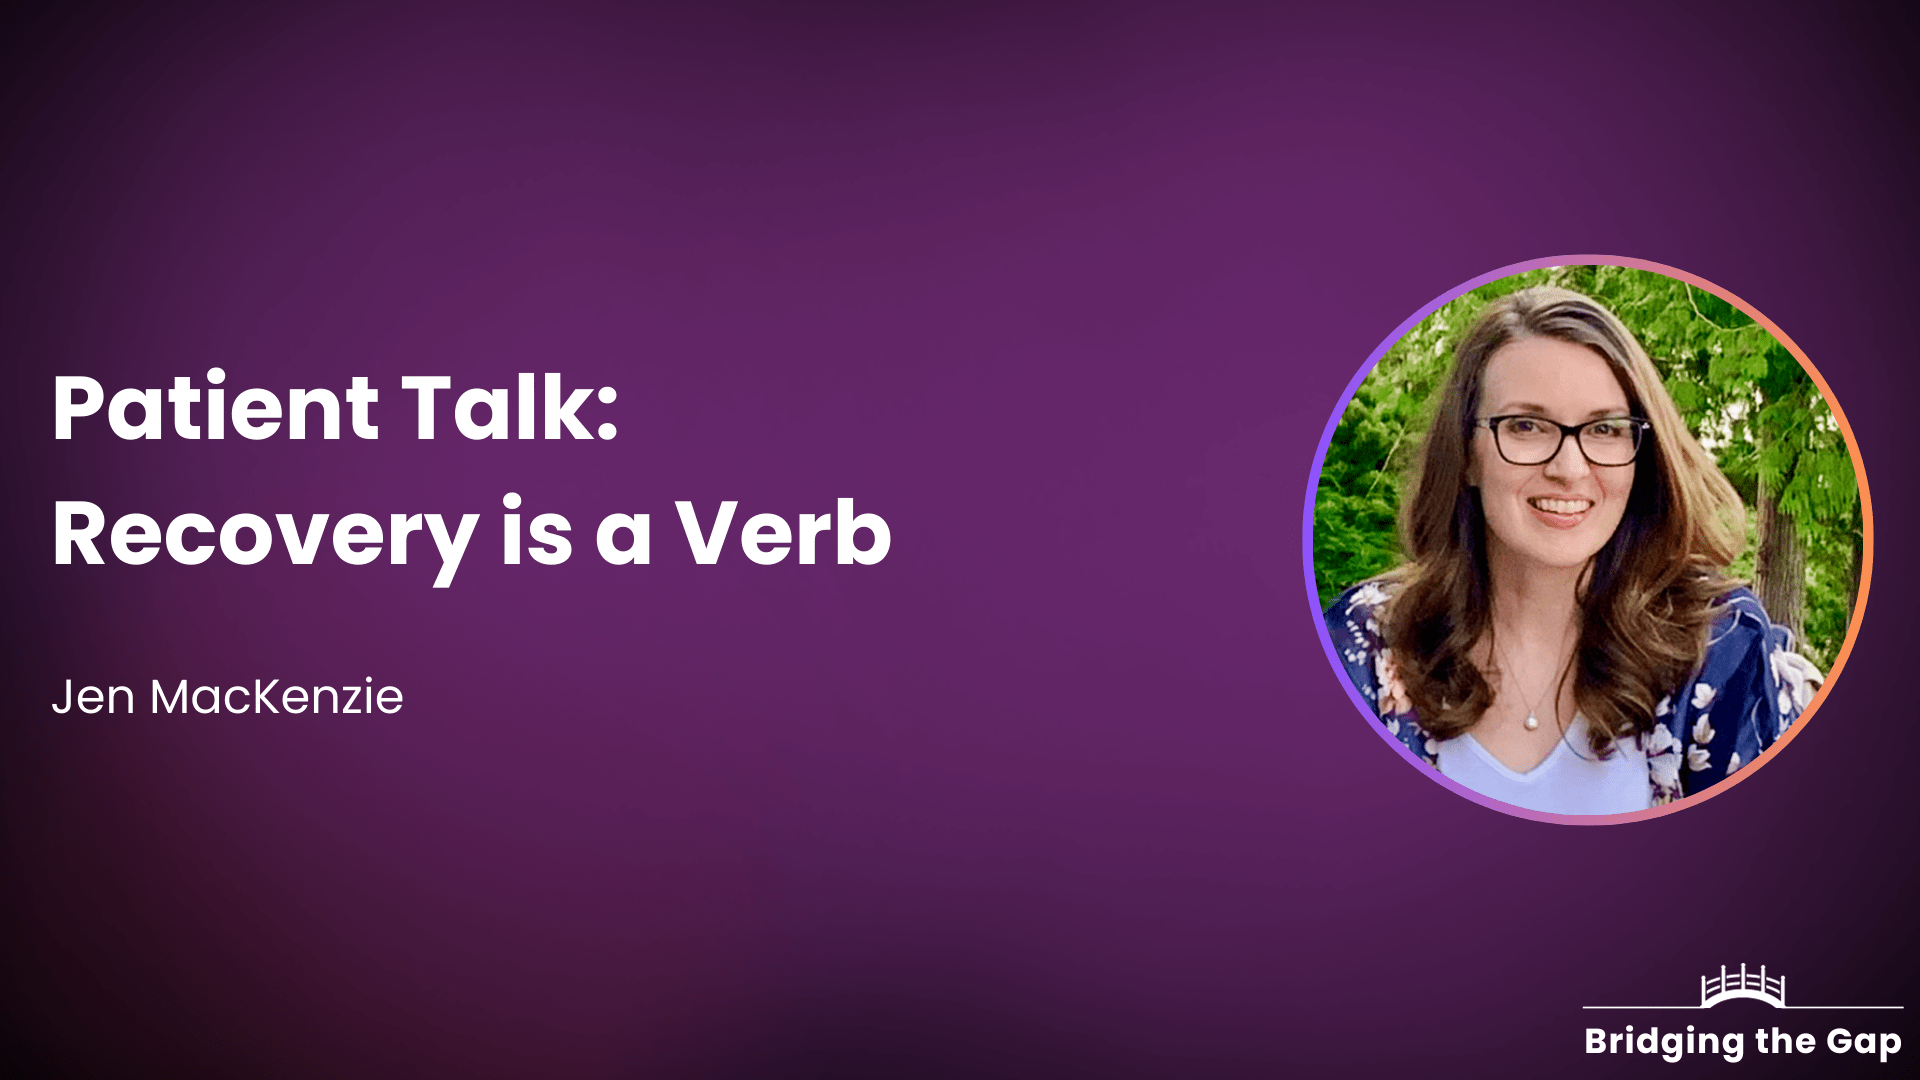 Patient Talk: Recovery is a Verb